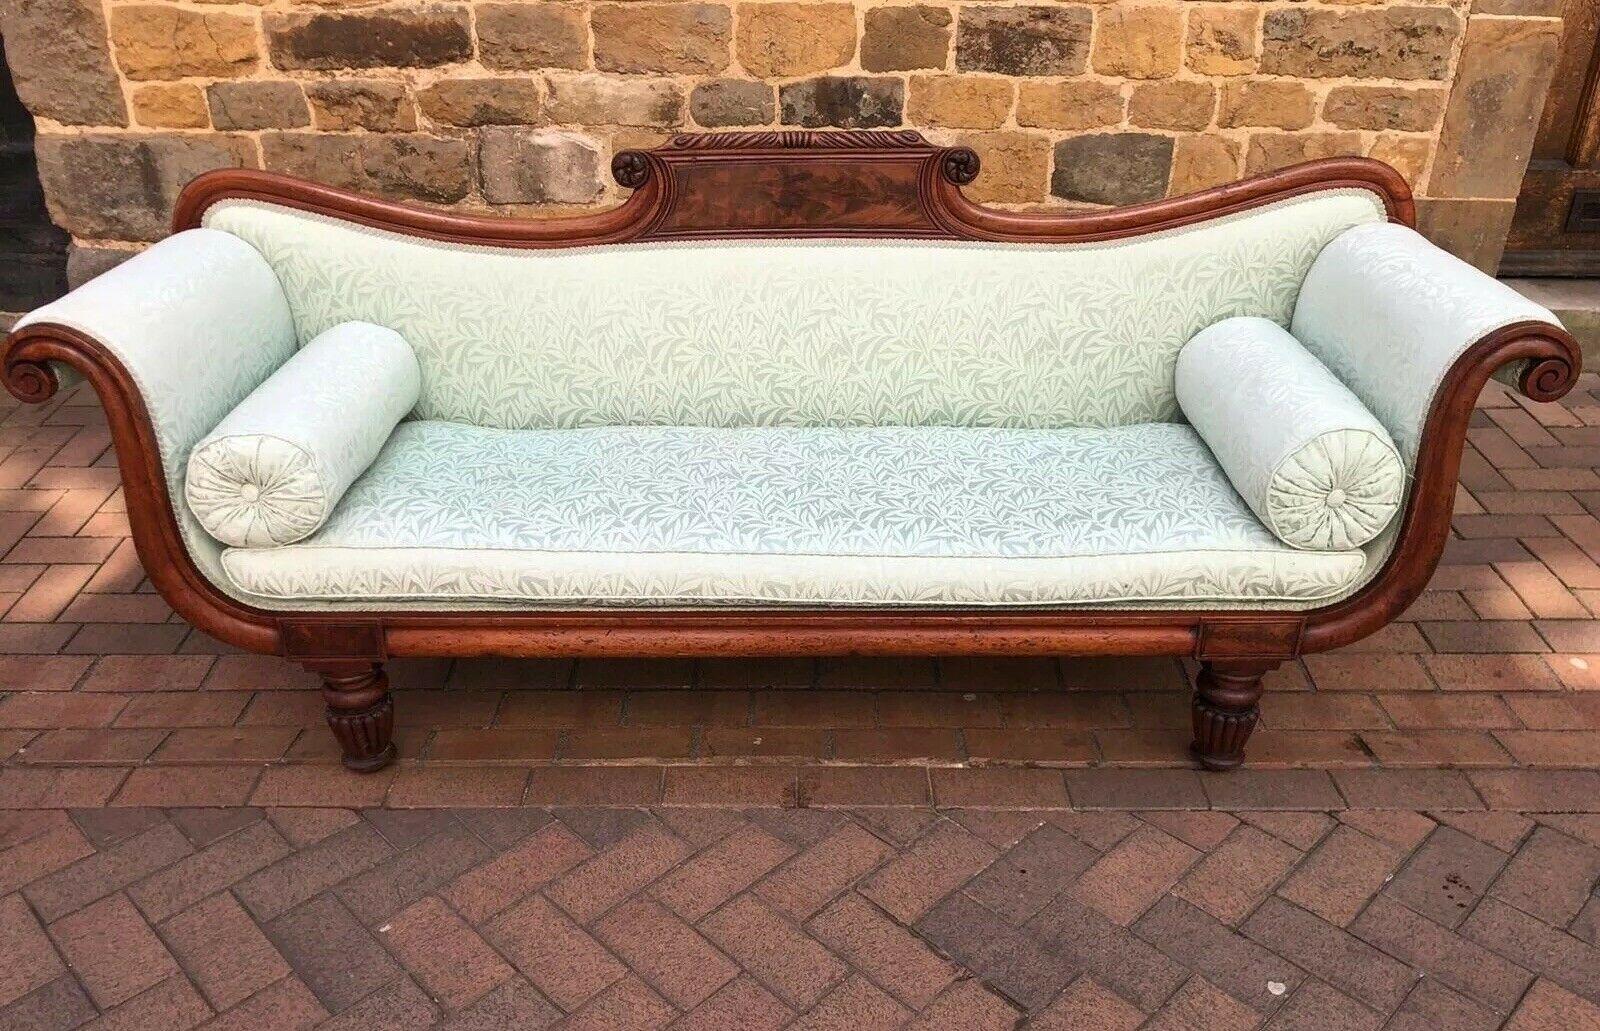 This superb William IV sofa is of fine quality and elegant form.

It comprises of a mahogany frame and features a shaped and carved top rail, scrolled arms and fluted legs.

The recently reupholstered light mint green silk fabric has a beautiful